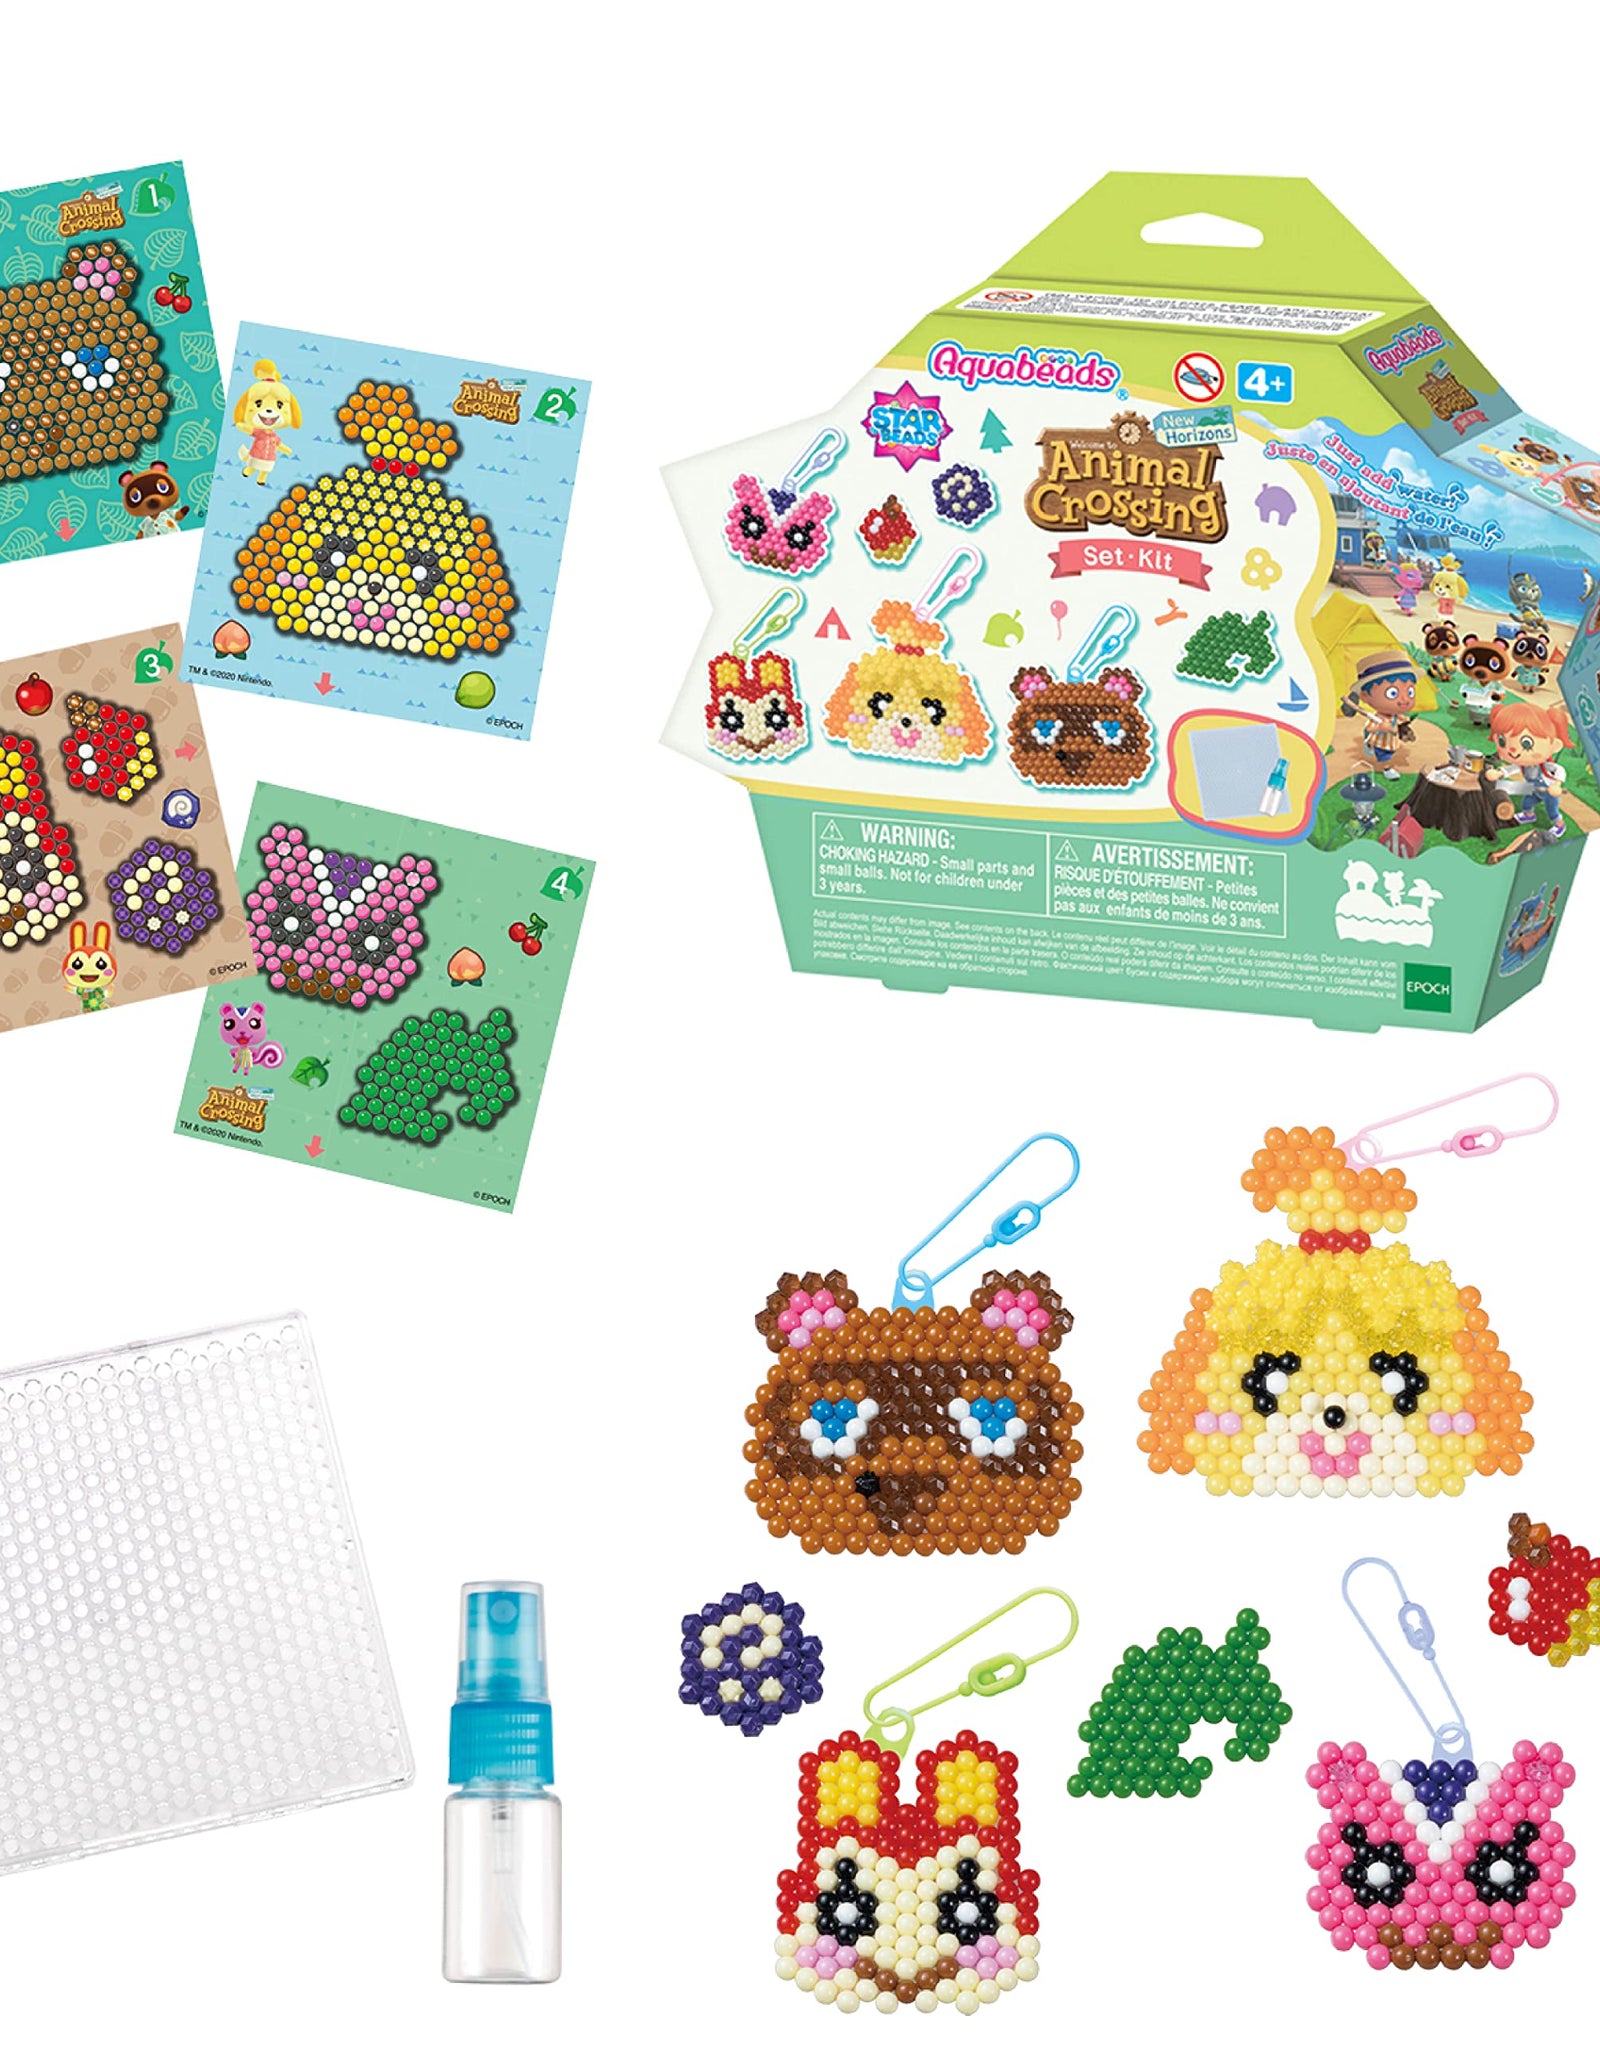 Aquabeads Animal Crossing : New Horizons Character Set, Kids Crafts, Beads, Arts and Crafts, Complete Activity Kit for 4+